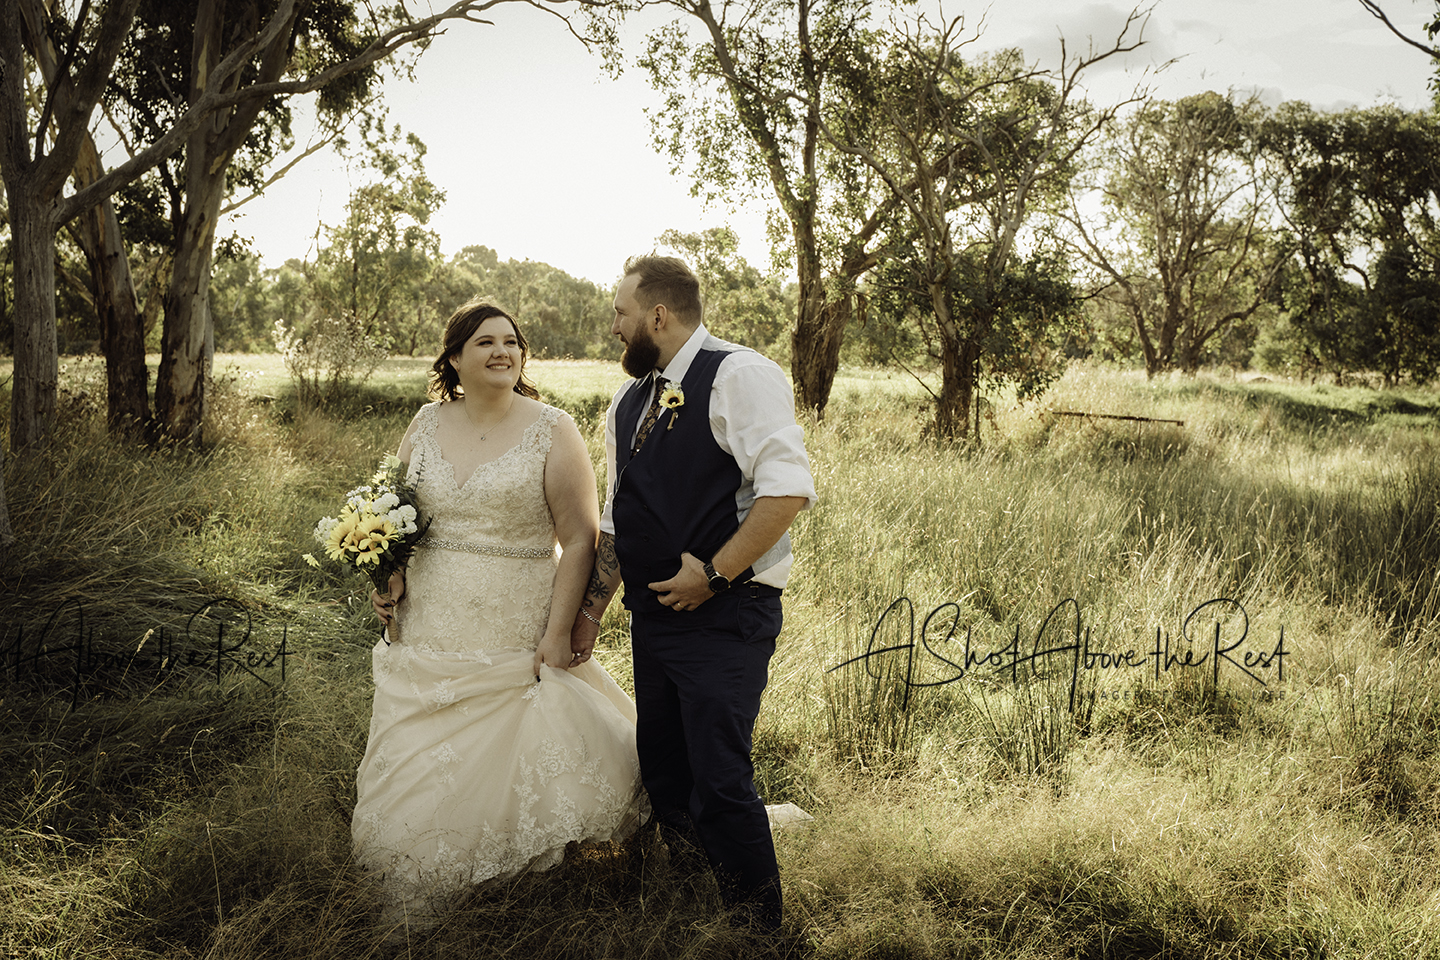 Natalie and Jordan are Married – Gold Creek Station, Hall 01.04.22